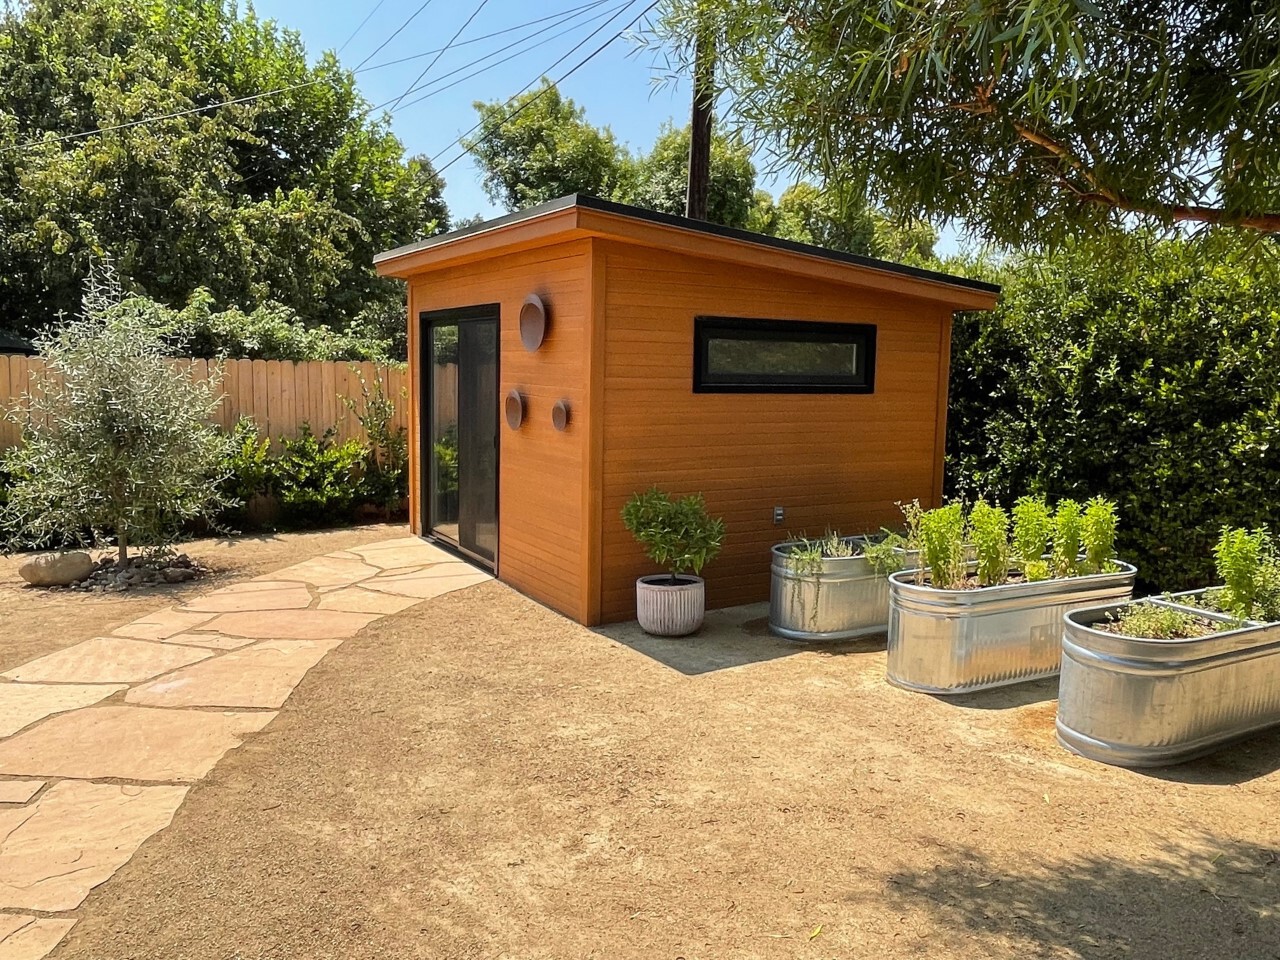 Front view of 10' x 12' Urban Studio Home Studio located in Ojai, California – Summerwood Products